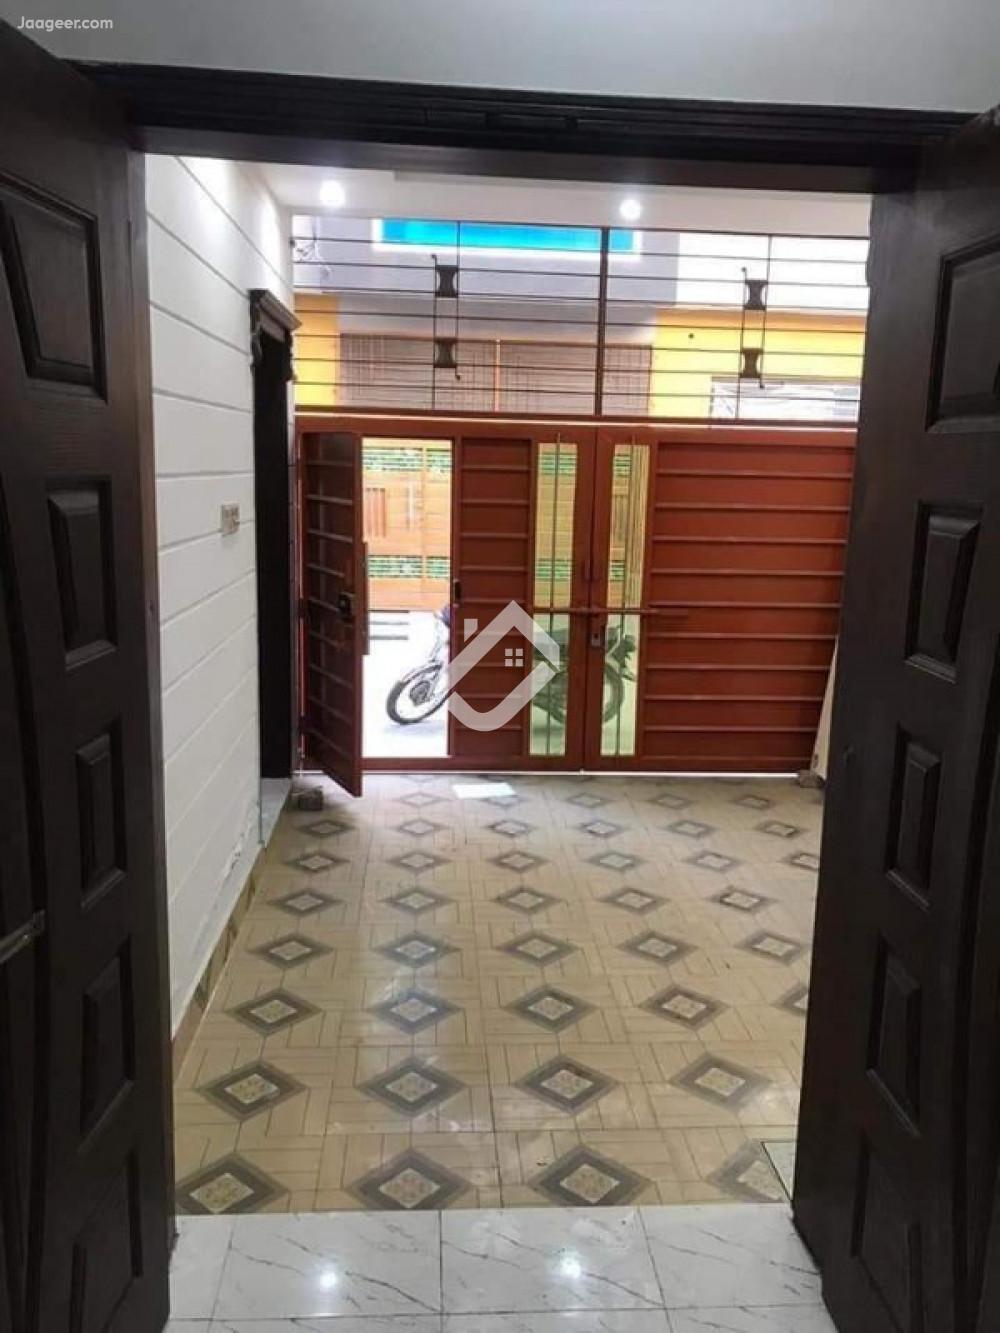 Main image 5 Marla Double Storey House For Sale In Ghous Garden Phase-4 Canal Bank Road Bata Pur Ghous Garden, Lahore